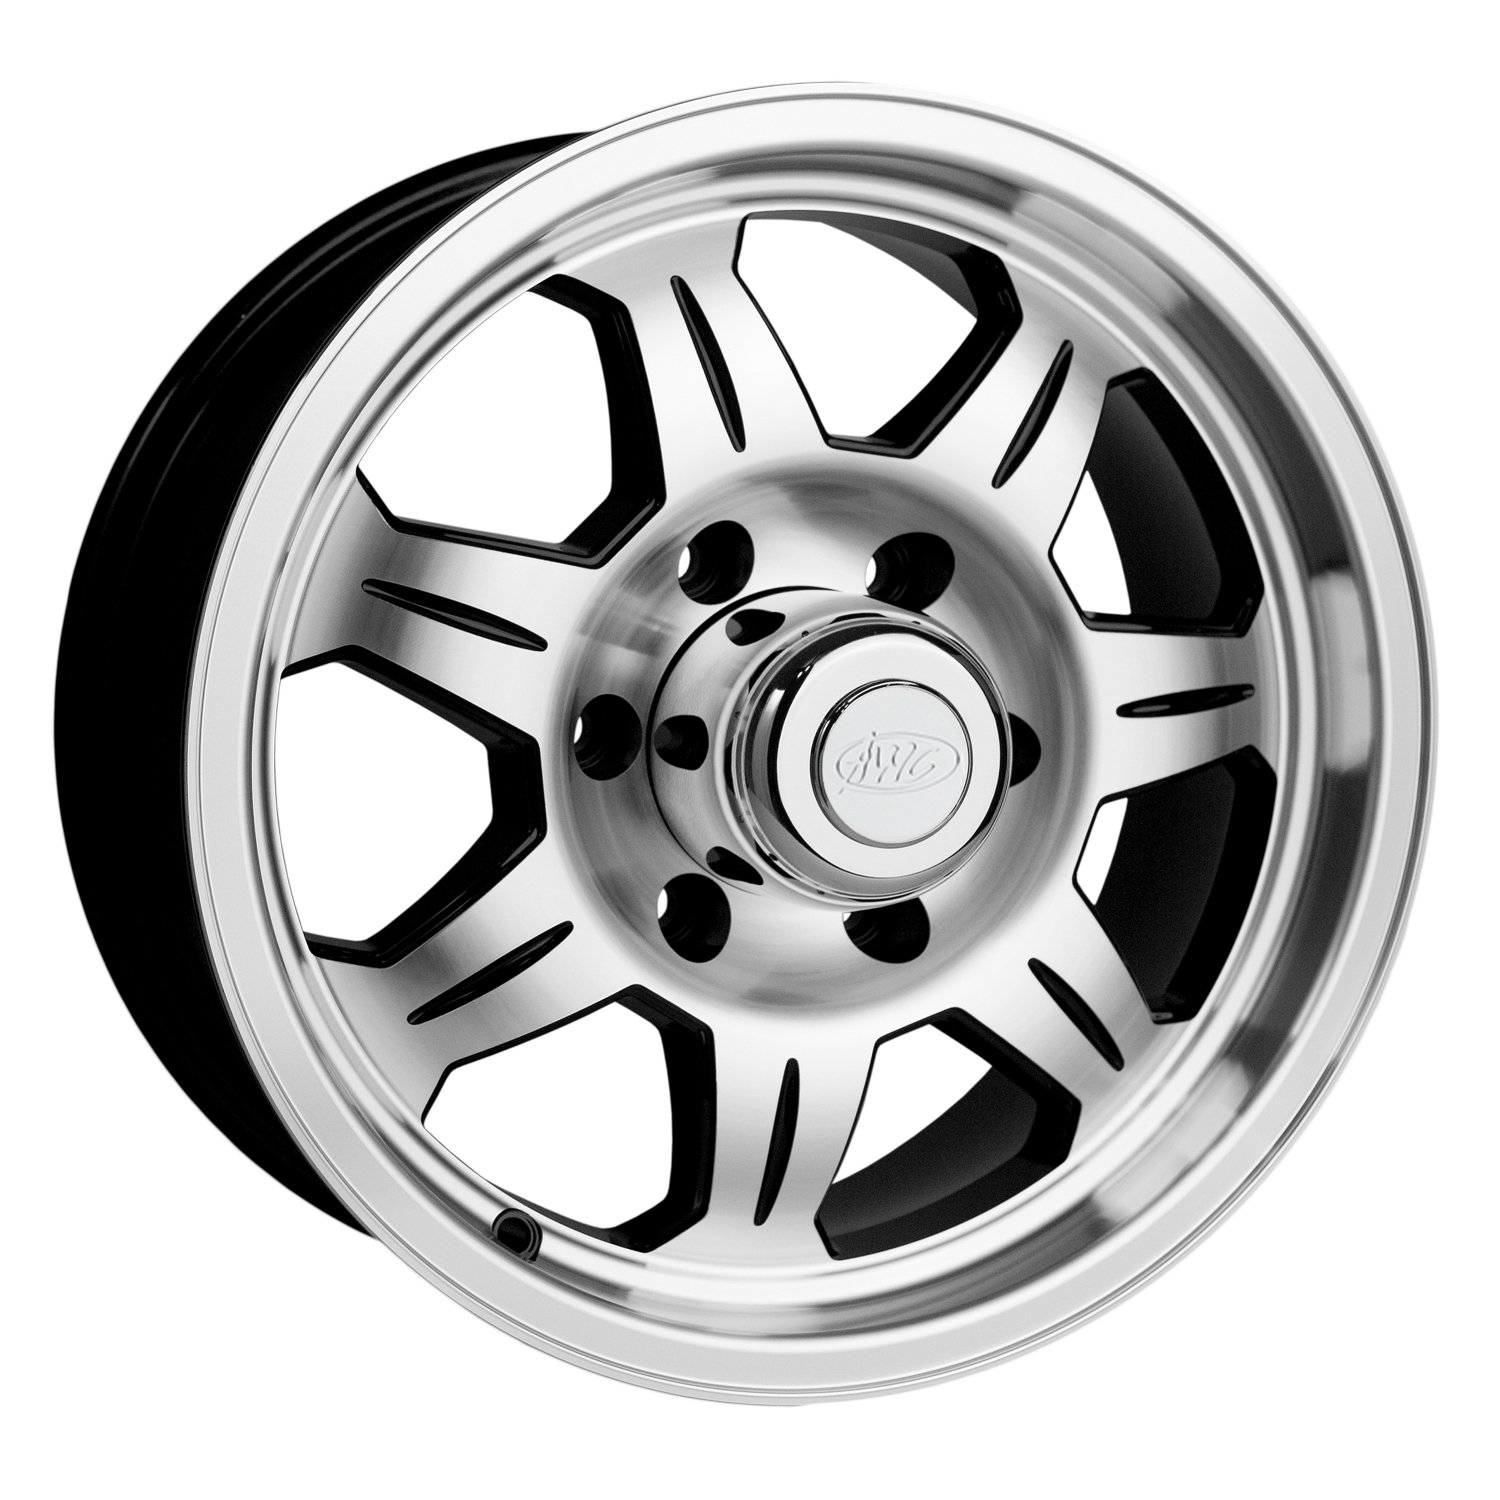 870 ELEMENT Trailer Wheel Size: 13 X 5" Bolt Pattern: 5 x 4.50" (114.30 mm) [Machined with Black Accents]